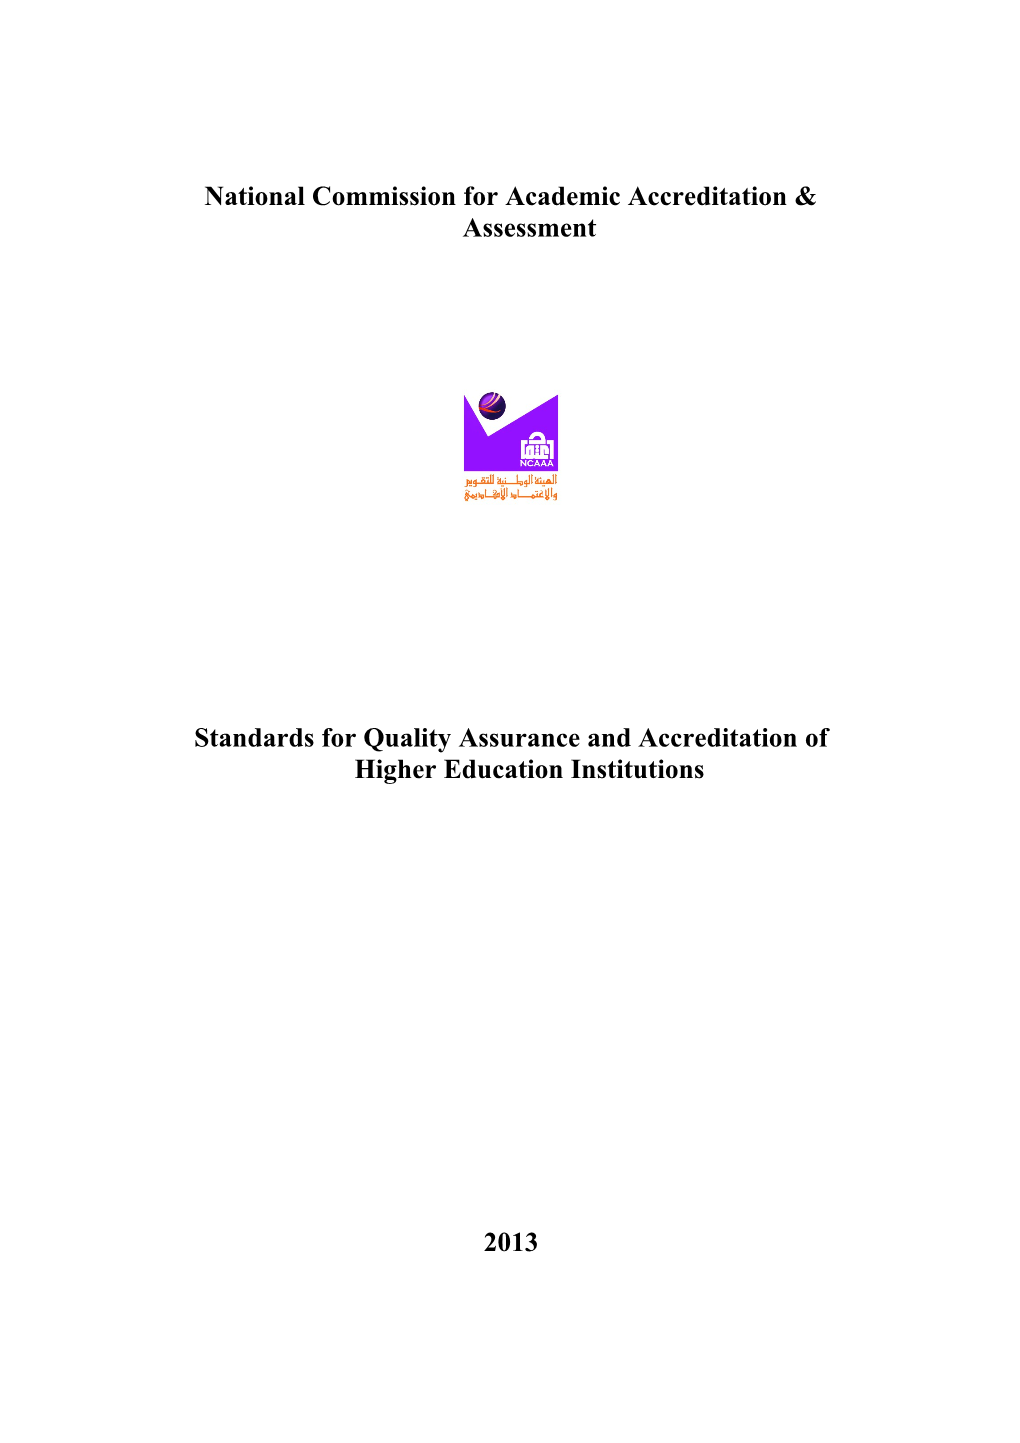 Standards for Institutional Accreditation in Higher Education